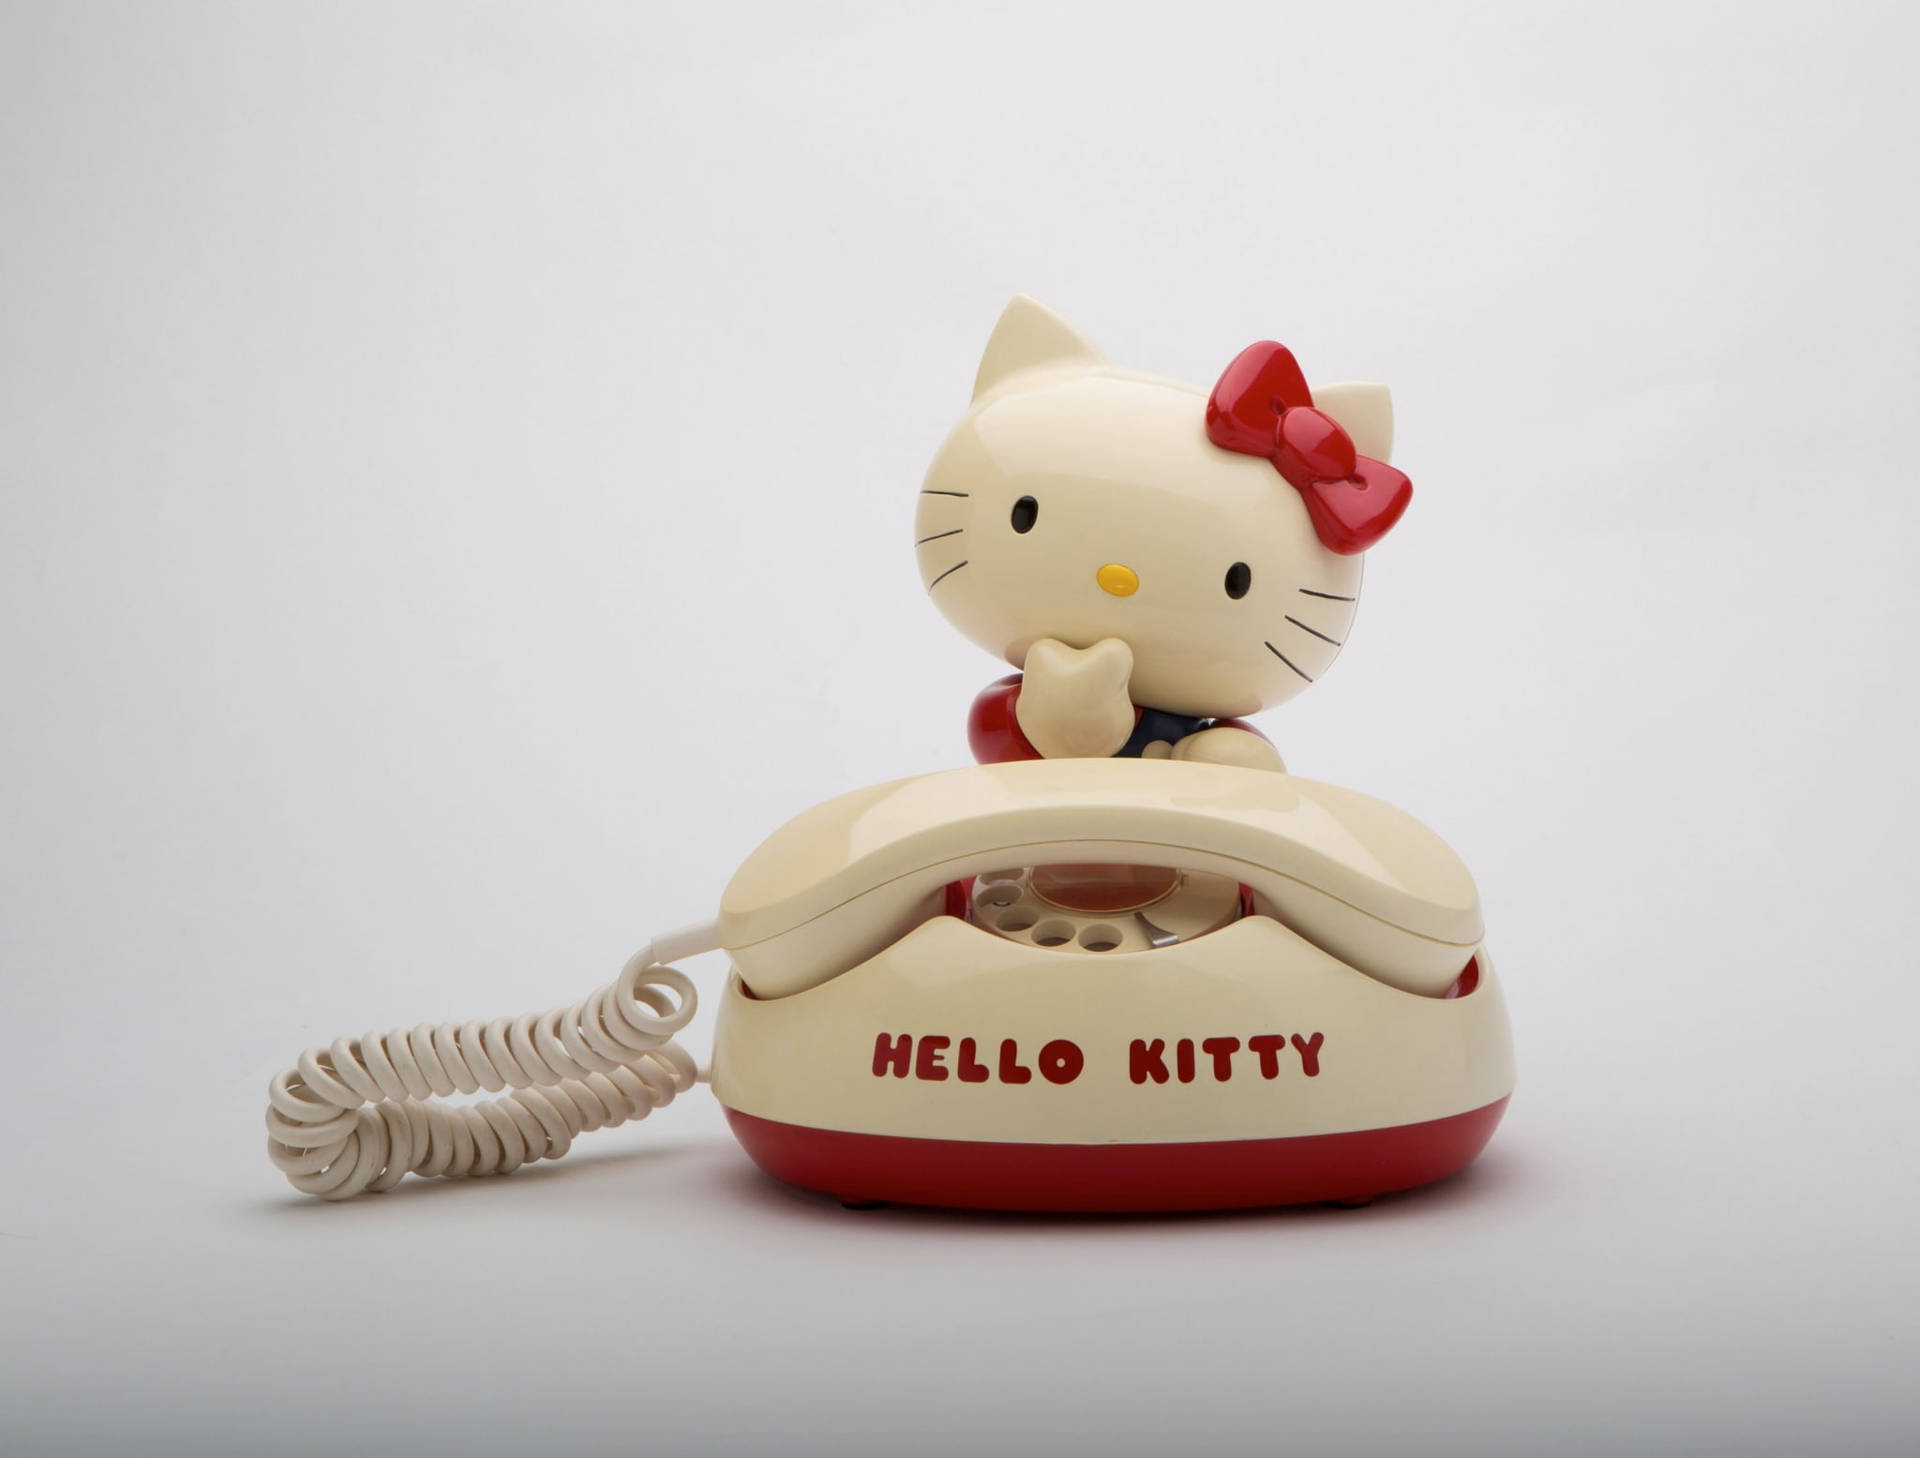 Caption: Interactive Hello Kitty At Desk With Telephone Wallpaper Background